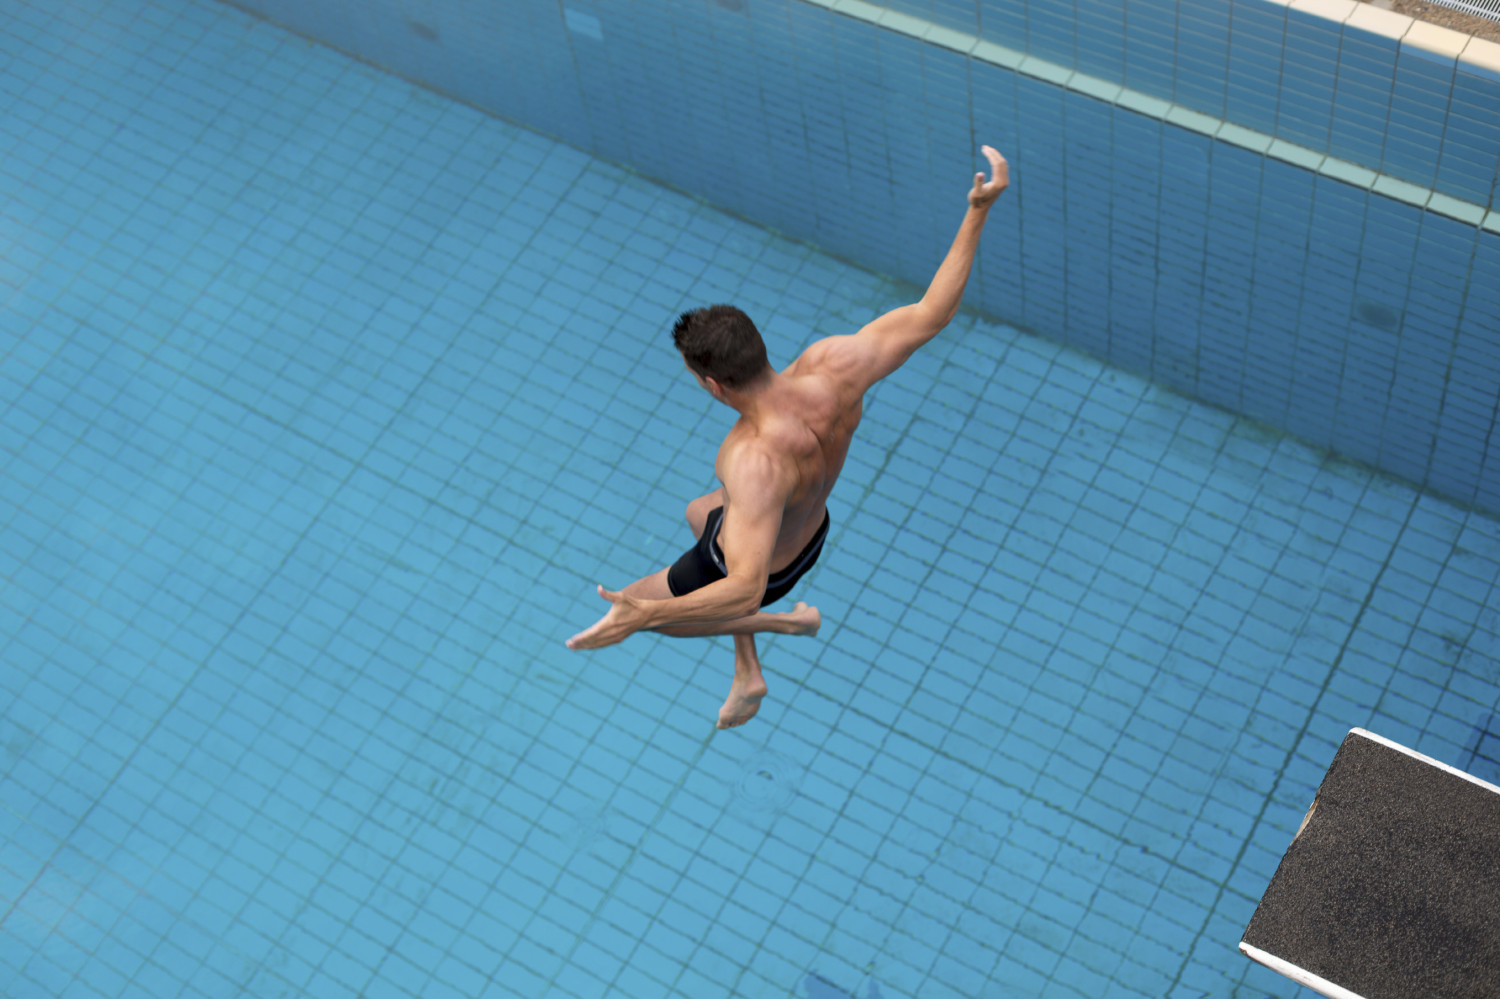 Man jumps from diving board at swimming pool